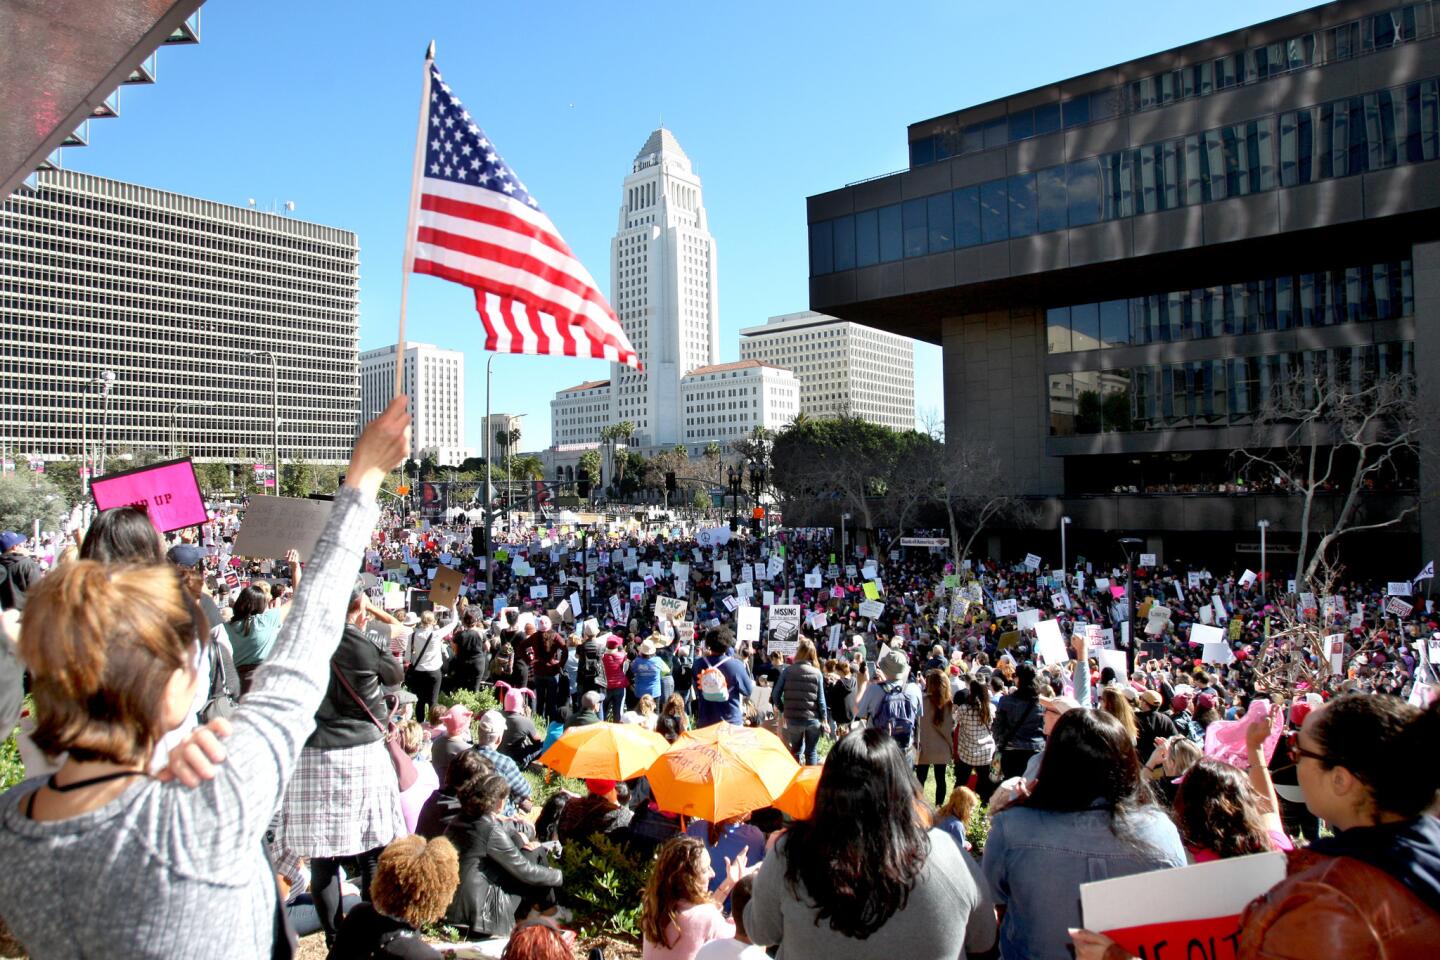 More than half million people gathered in downtown Los Angeles for the Women's March L.A., on Saturday Jan. 21, 2017. According to the organizer;s website, "We stand together in solidarity for the protection of our rights, our safety, our health, and our families, recognizing that our vibrant and diverse communities are the strength of our country."